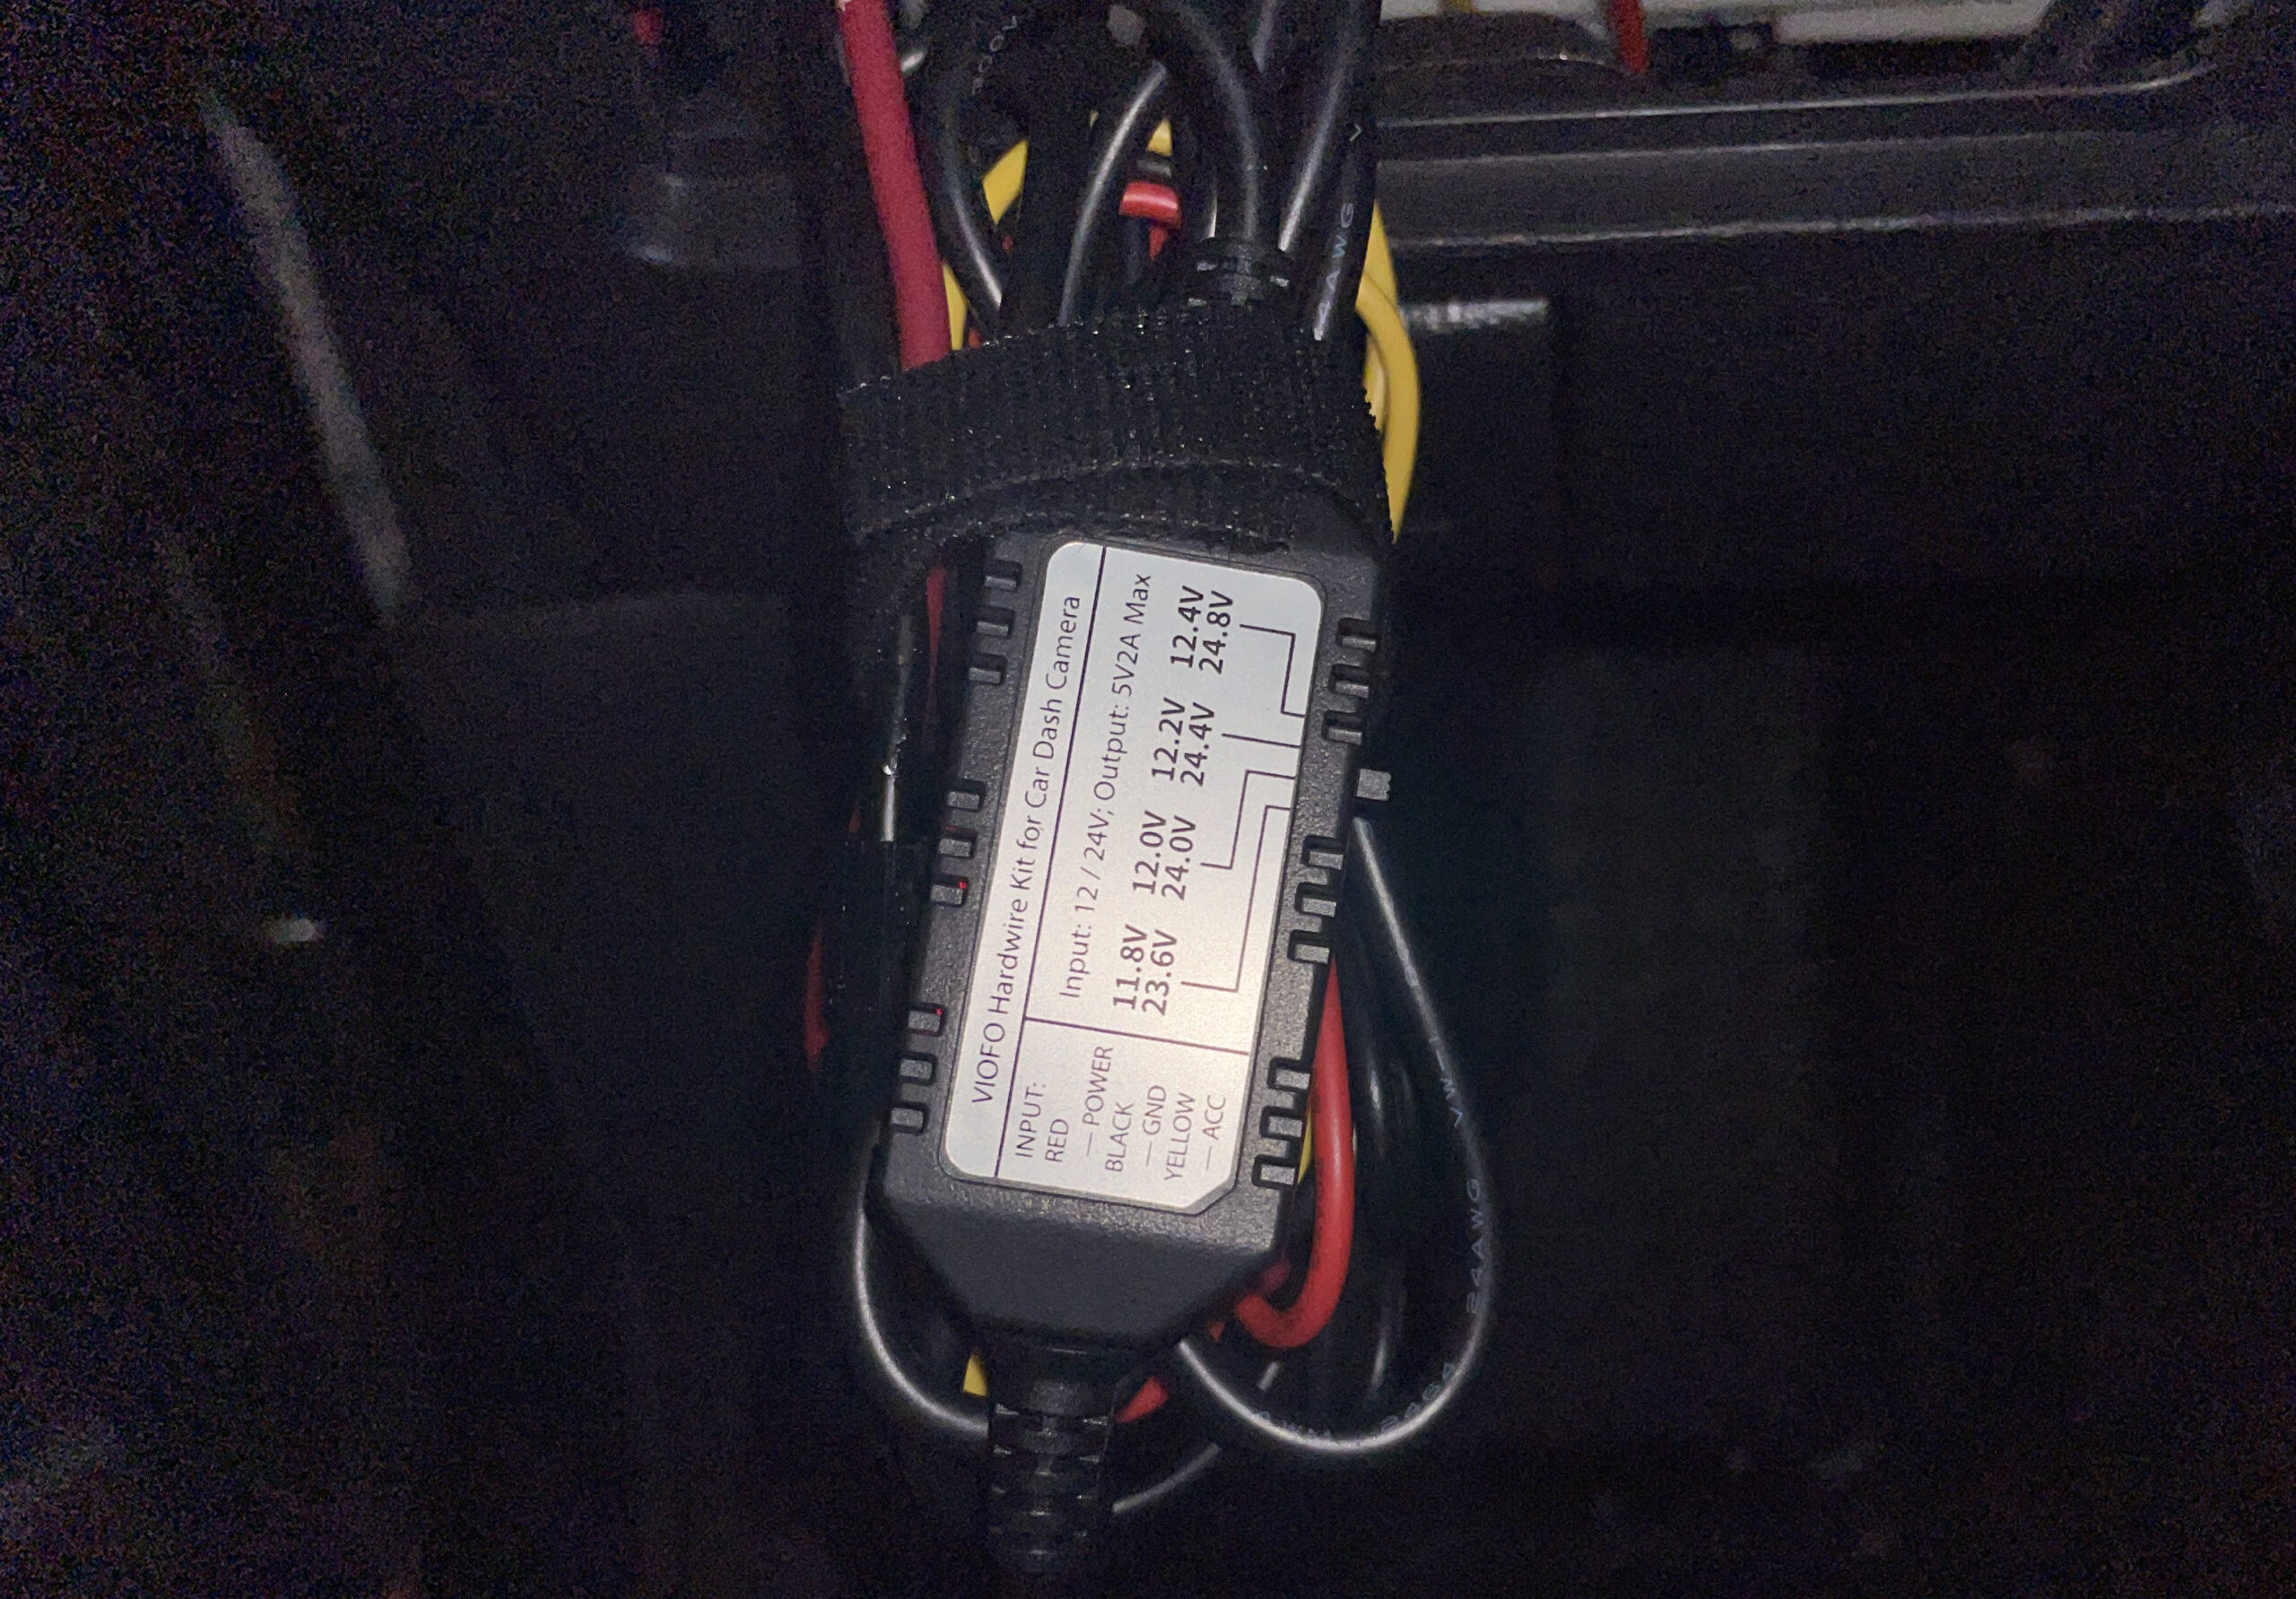 A picture of a Viofo hardwire kit set to 12.2V. The wires are bundled with velcro.